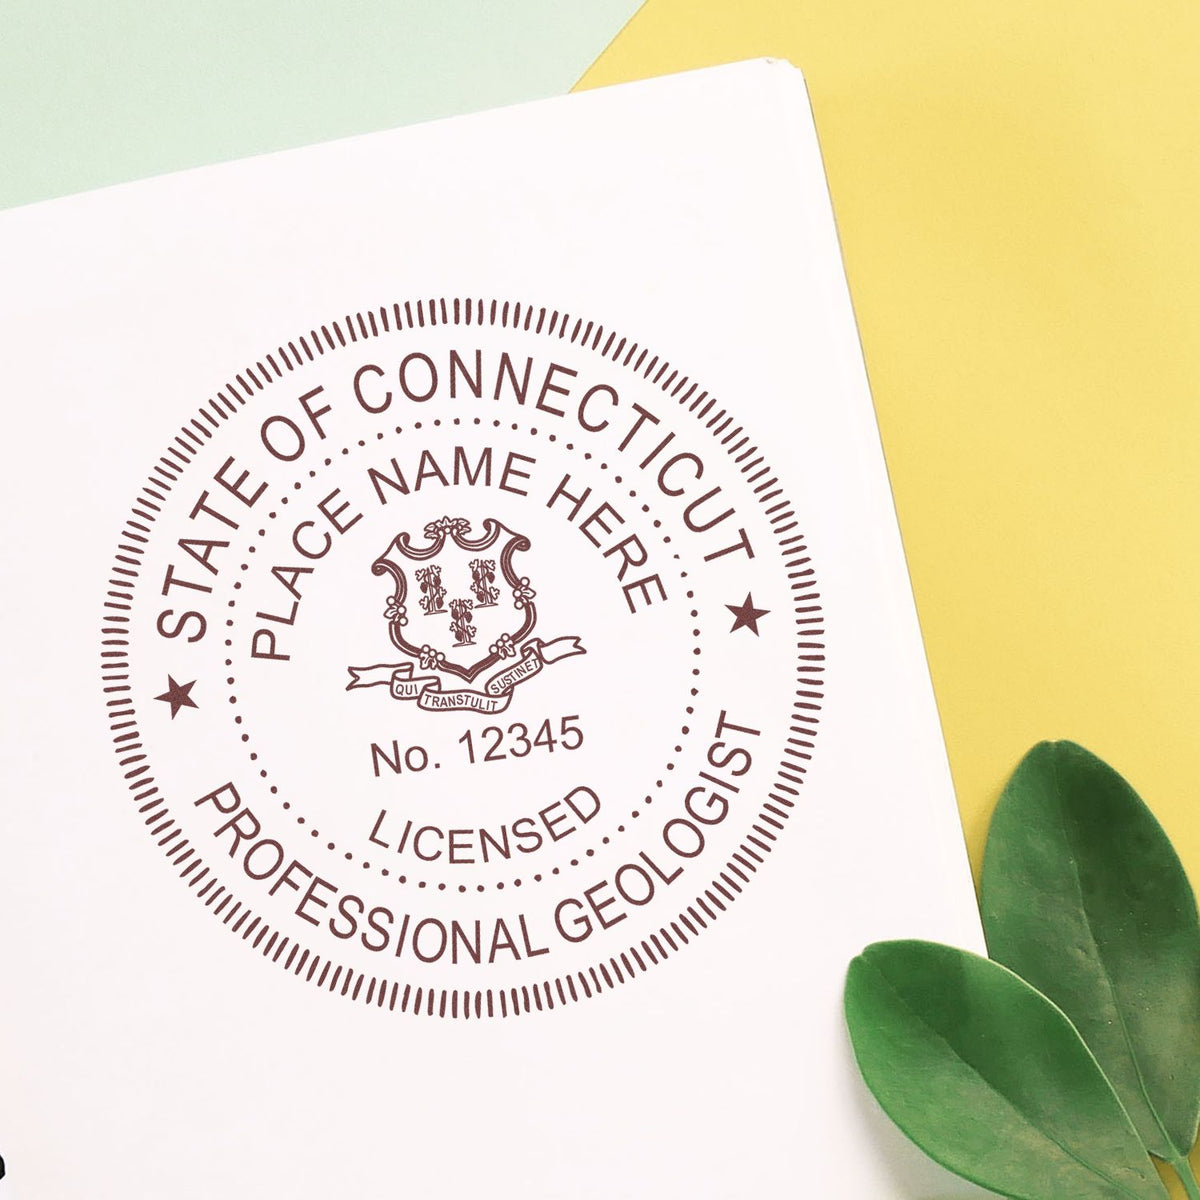 The Self-Inking Connecticut Geologist Stamp stamp impression comes to life with a crisp, detailed image stamped on paper - showcasing true professional quality.